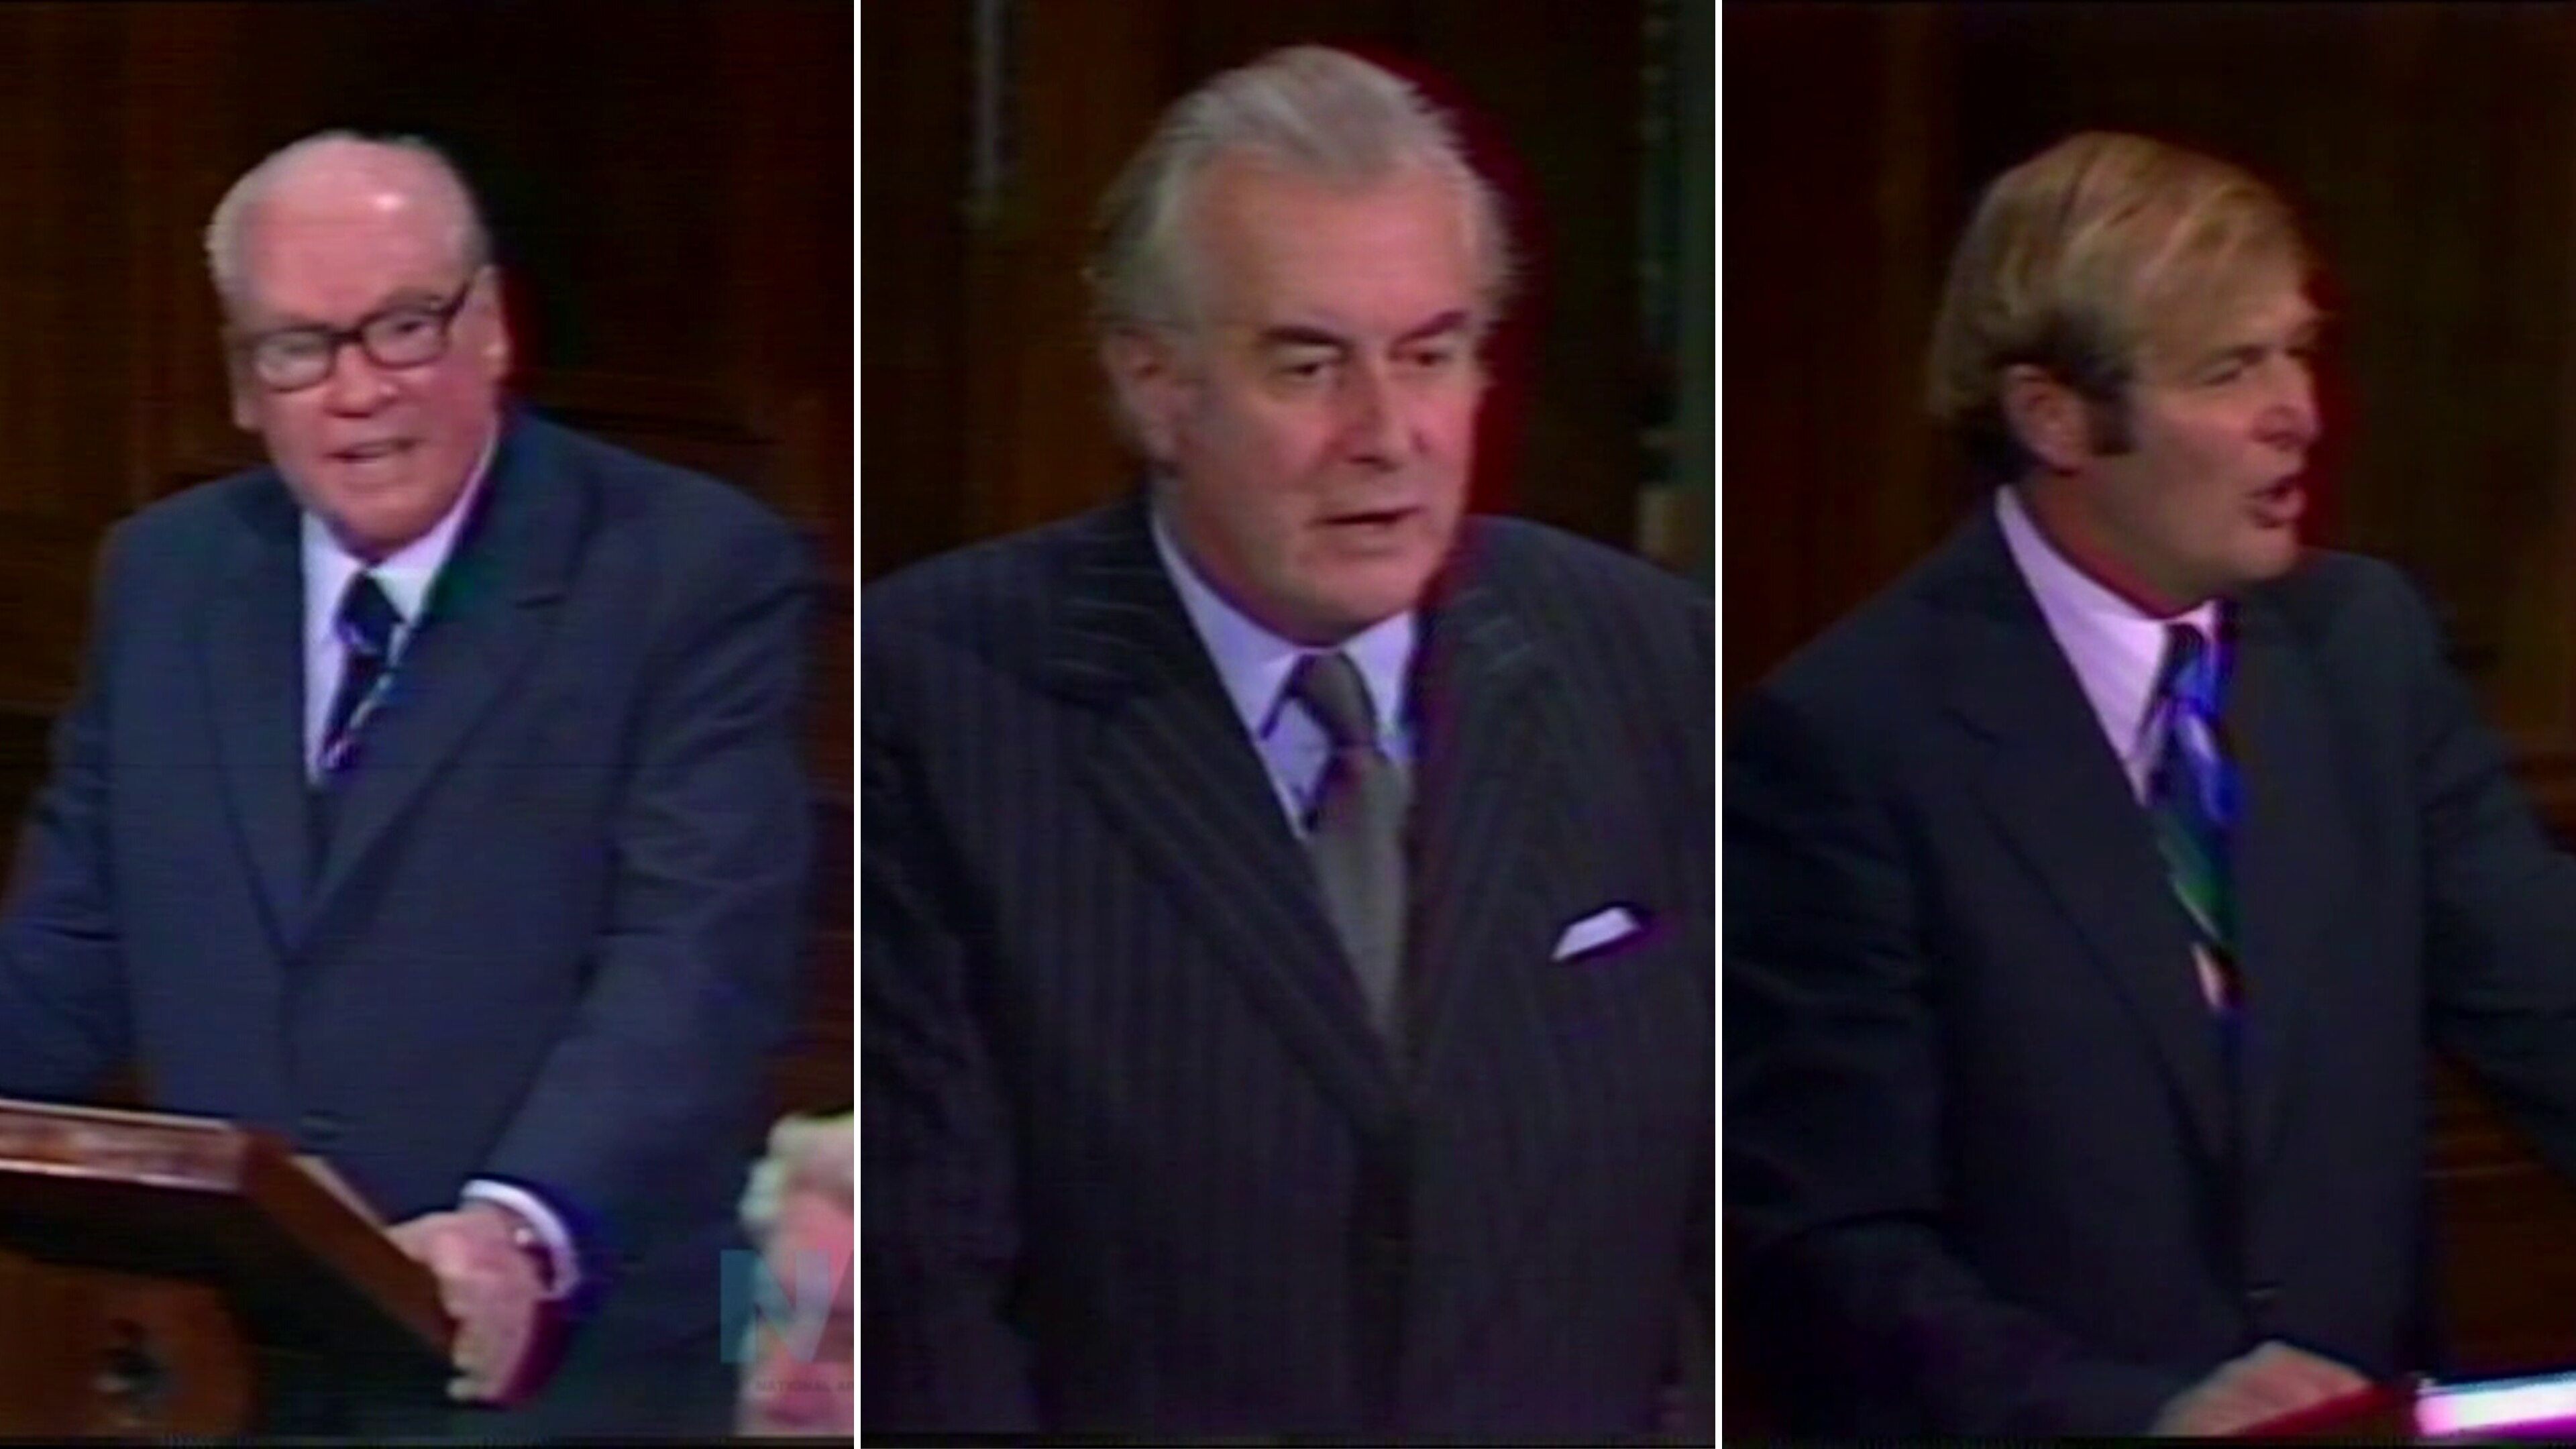 From left to right: Fred Daly, Gough Whitlam, and Dough Anthony. 